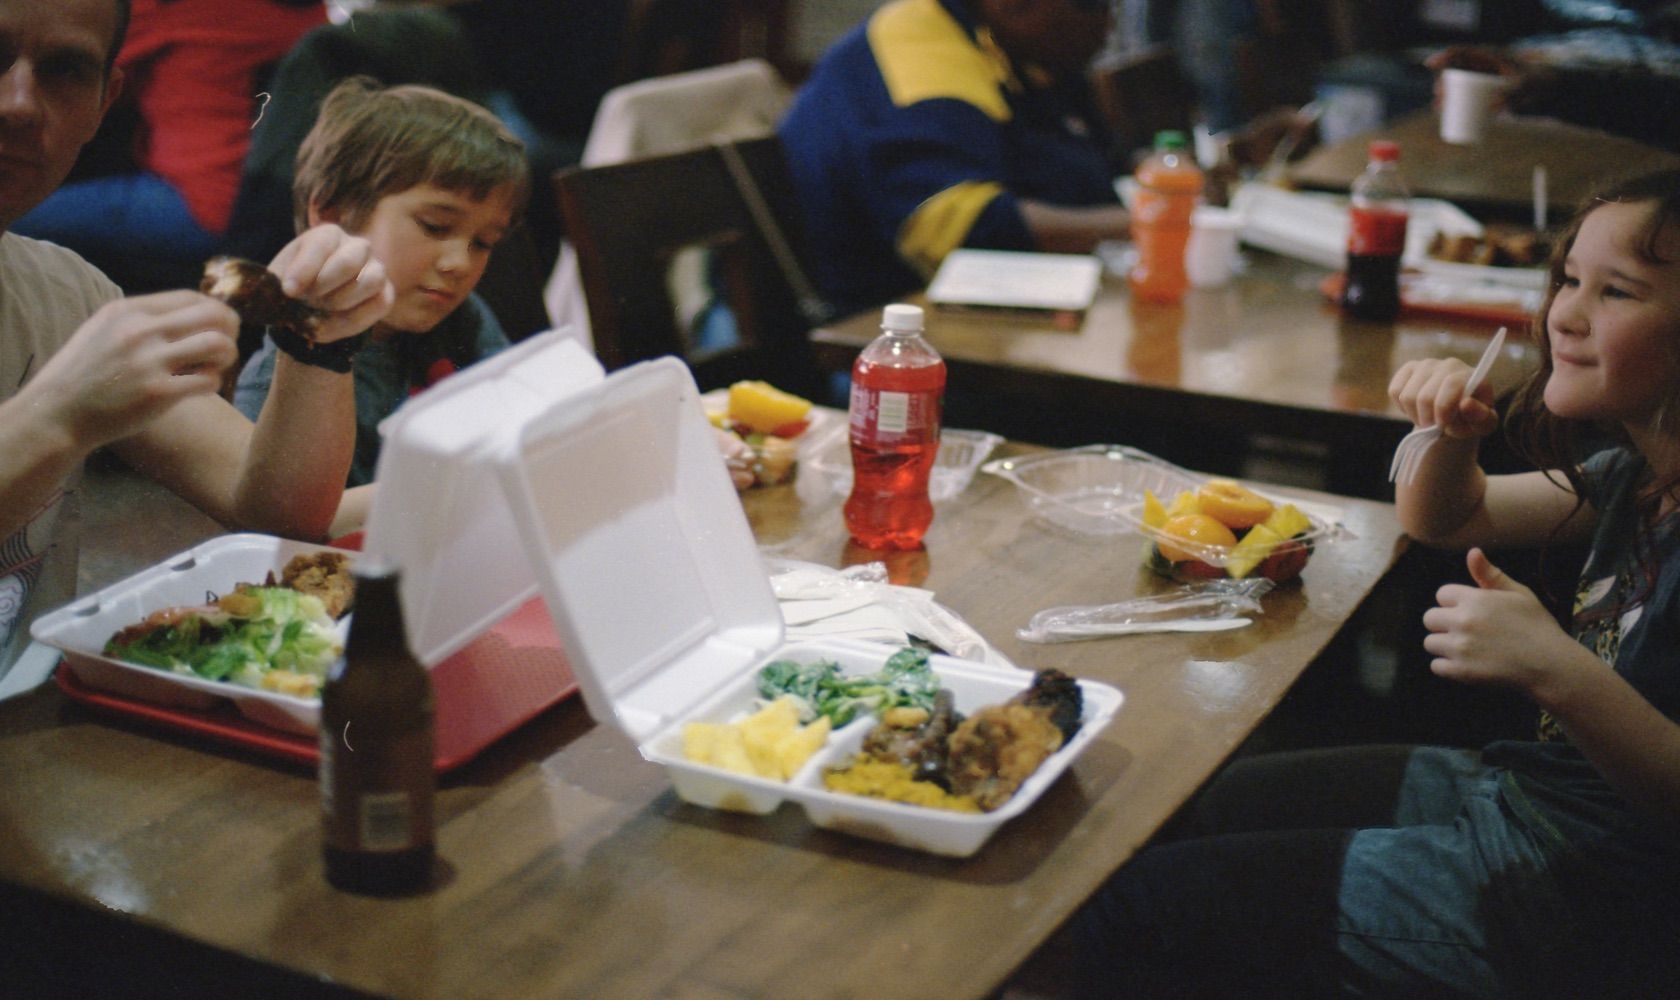 adult and two children eating food from takeout containers